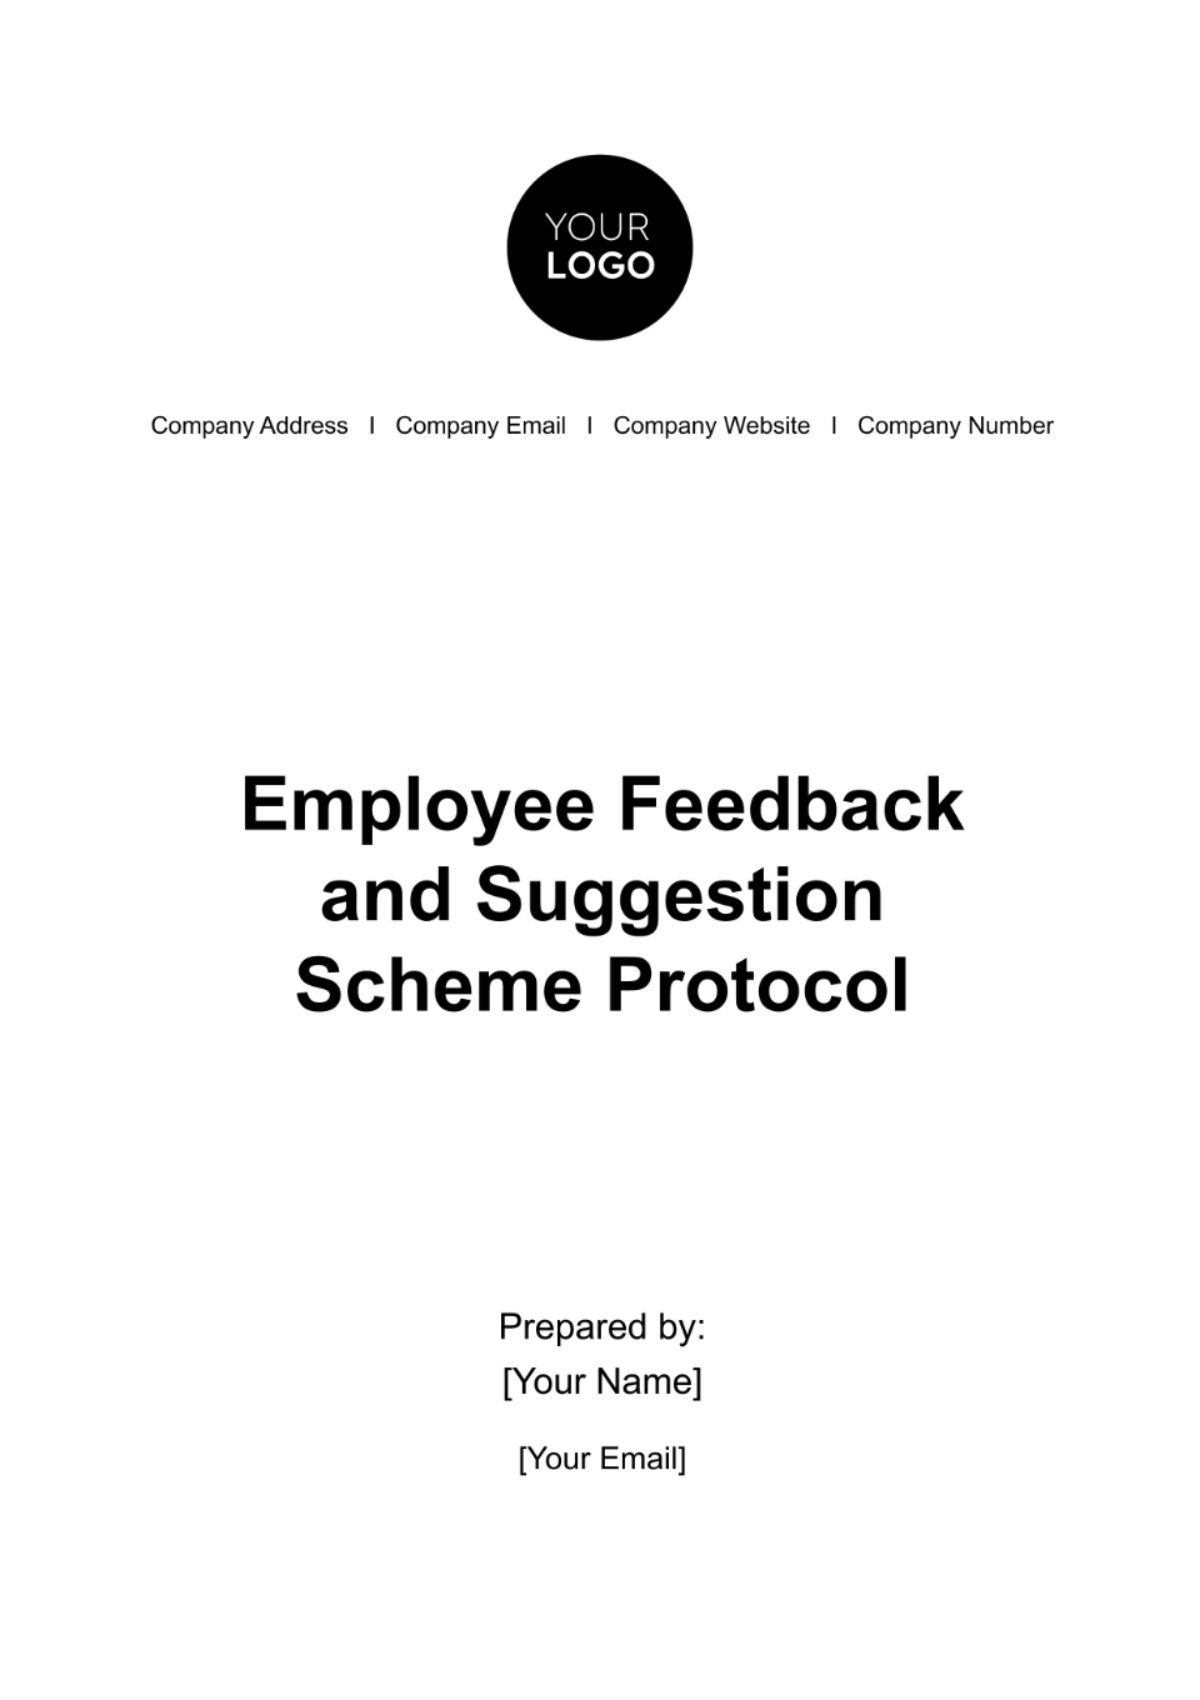 Free Employee Feedback and Suggestion Scheme Protocol HR Template